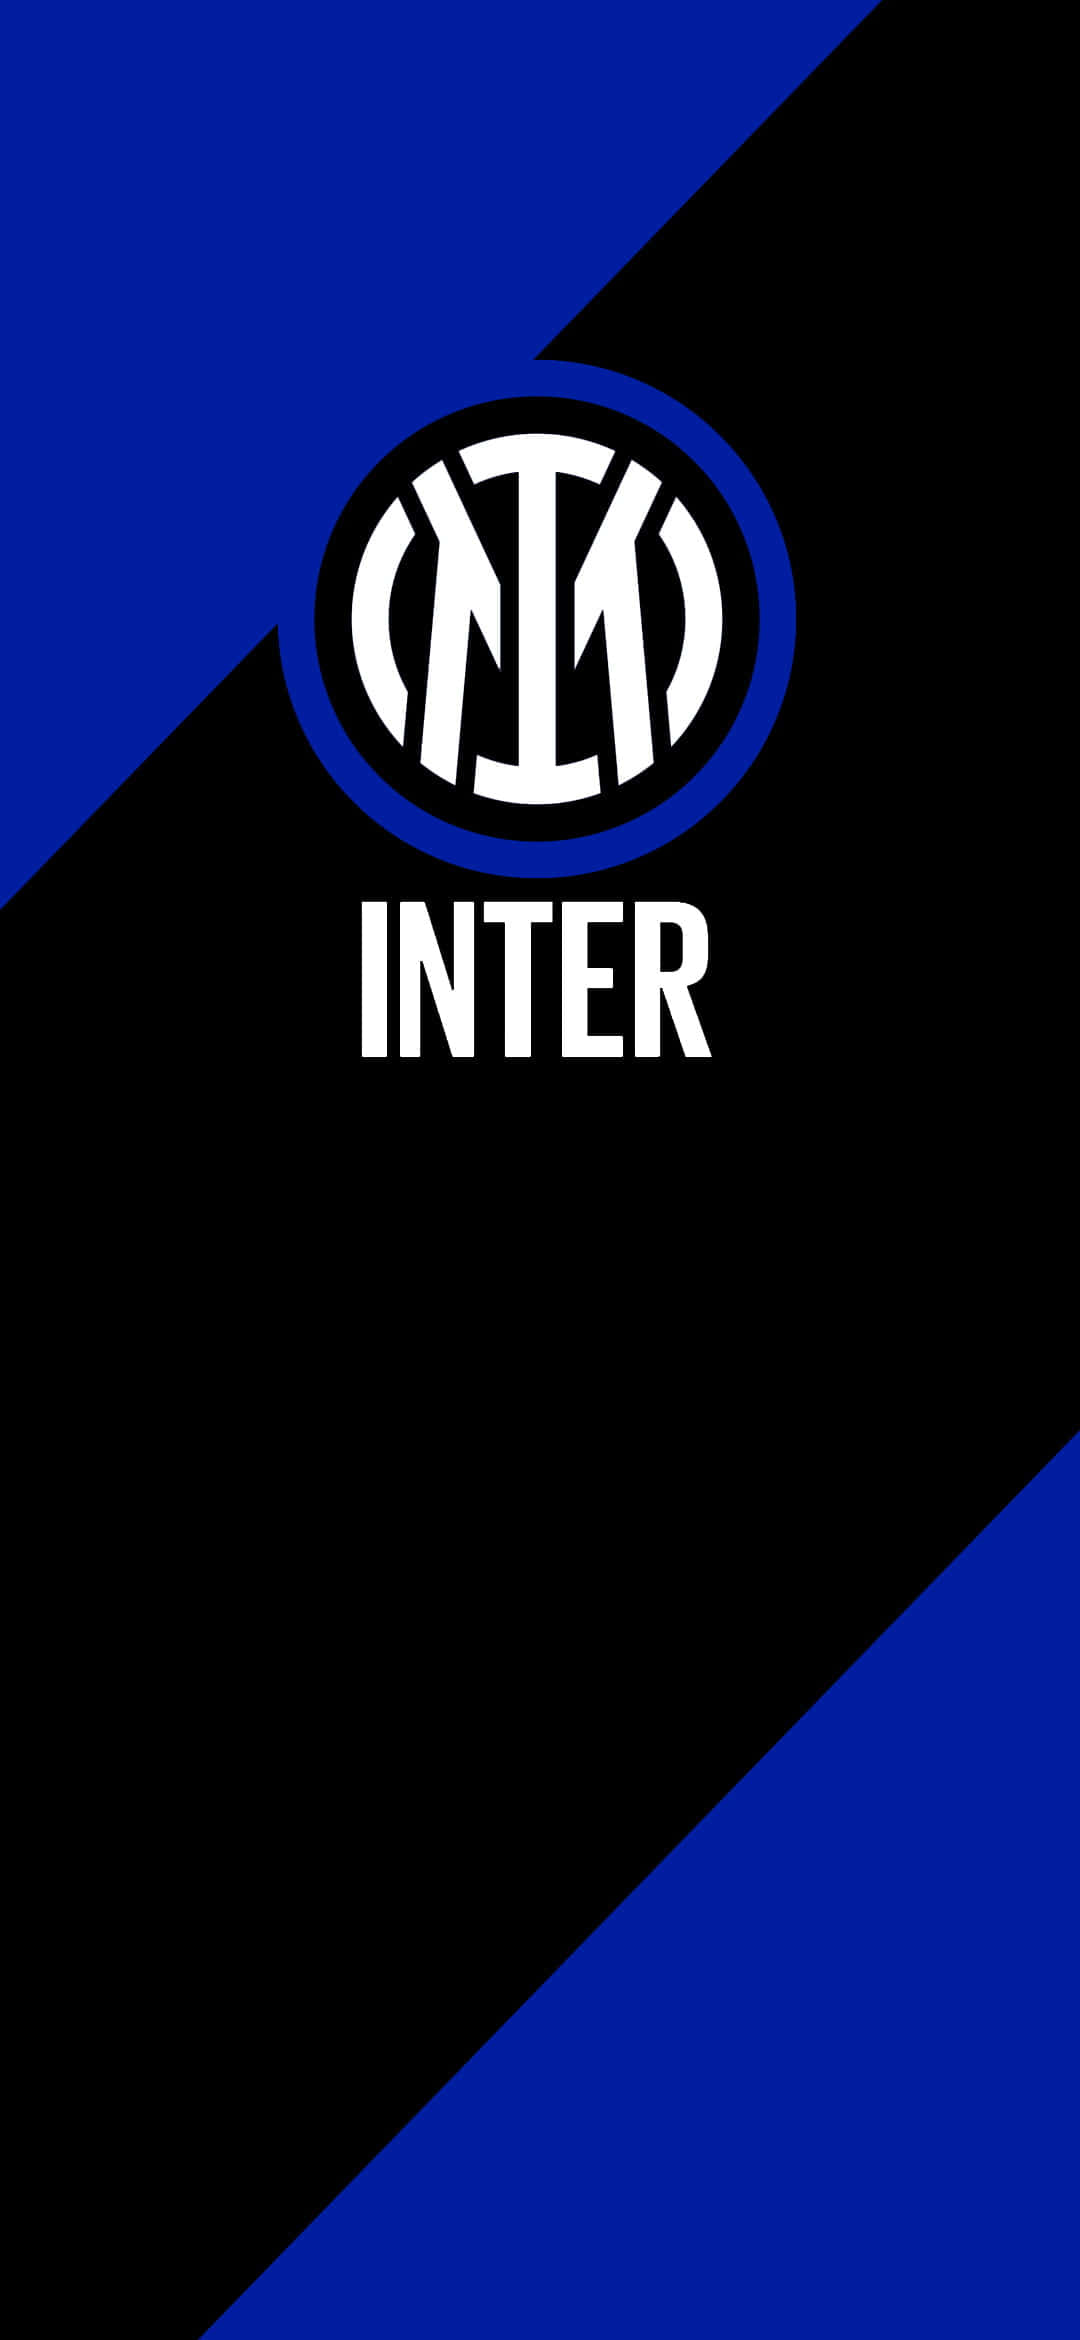 Discover 72+ inter wallpaper - in.cdgdbentre